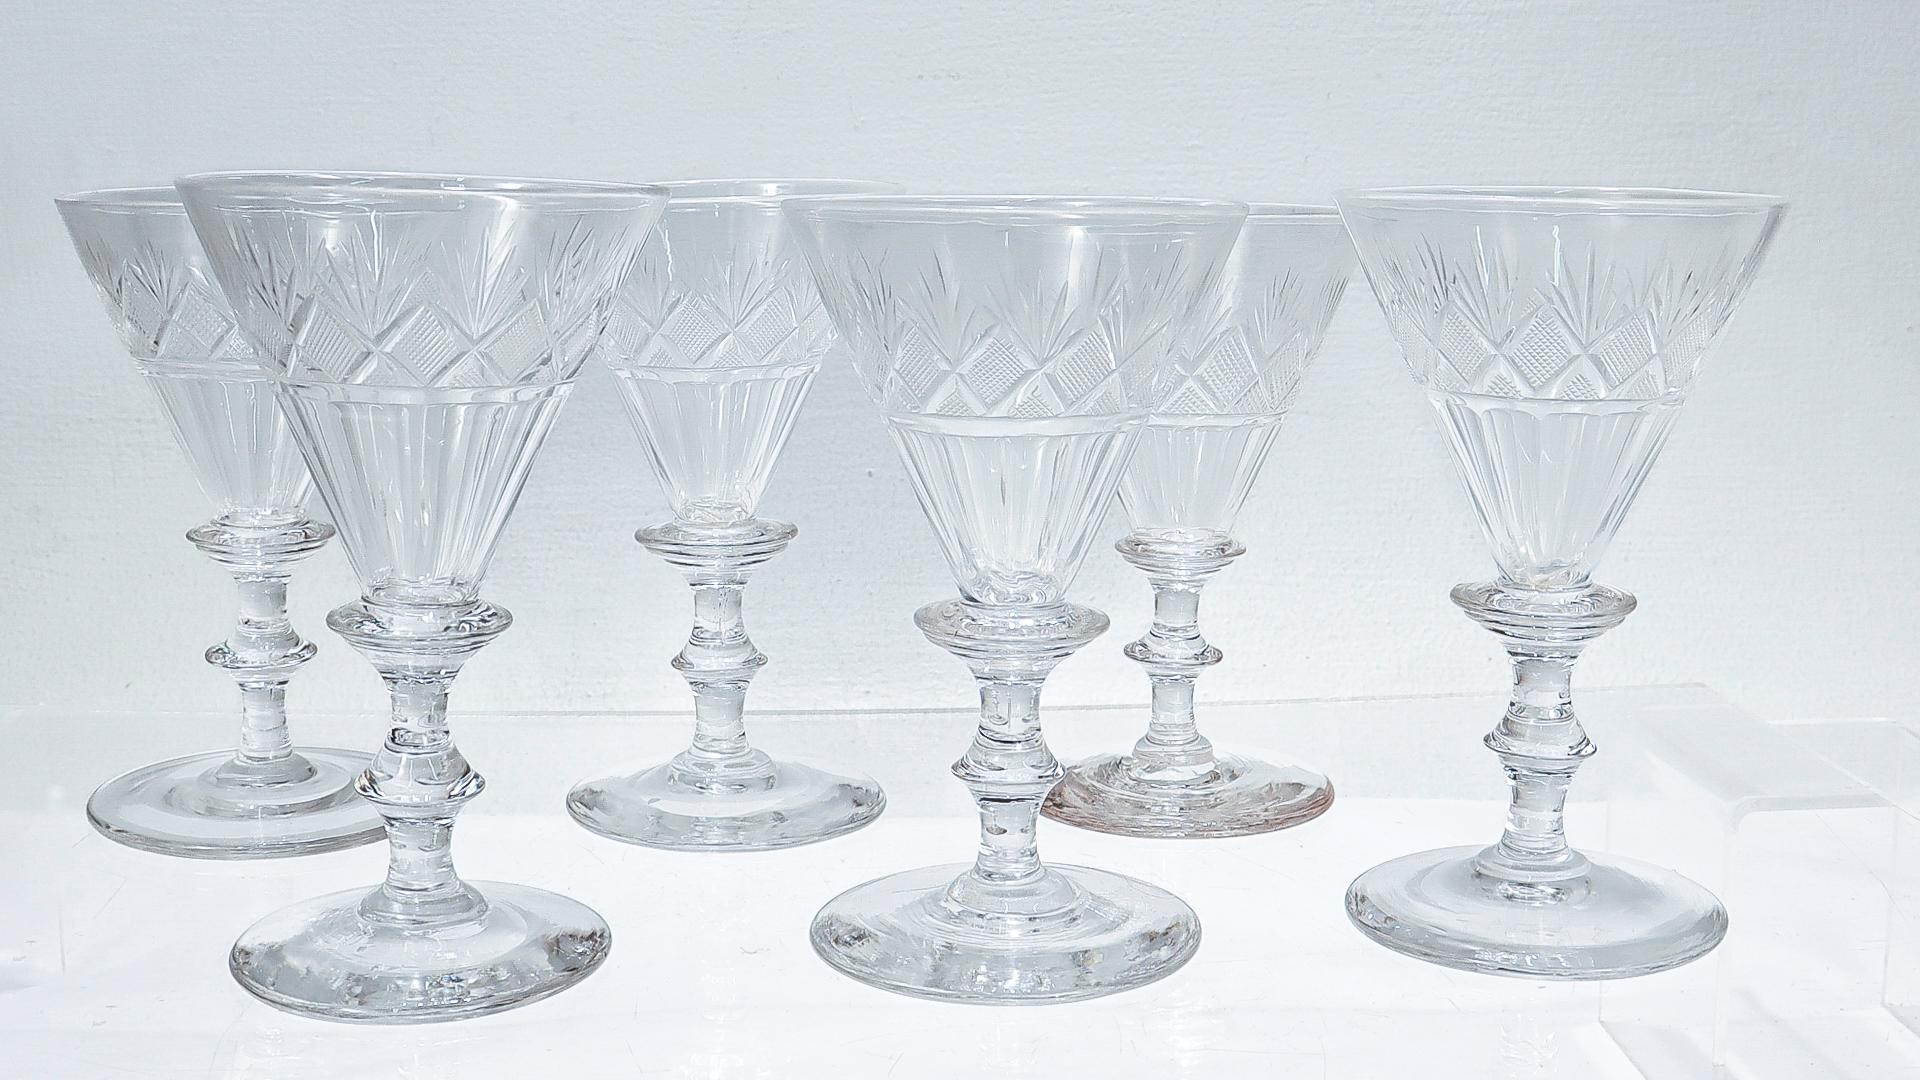 American Empire Set of 6 Antique 19th C Cut Glass Wine Stems or Glasses Attributed to Bakewell For Sale